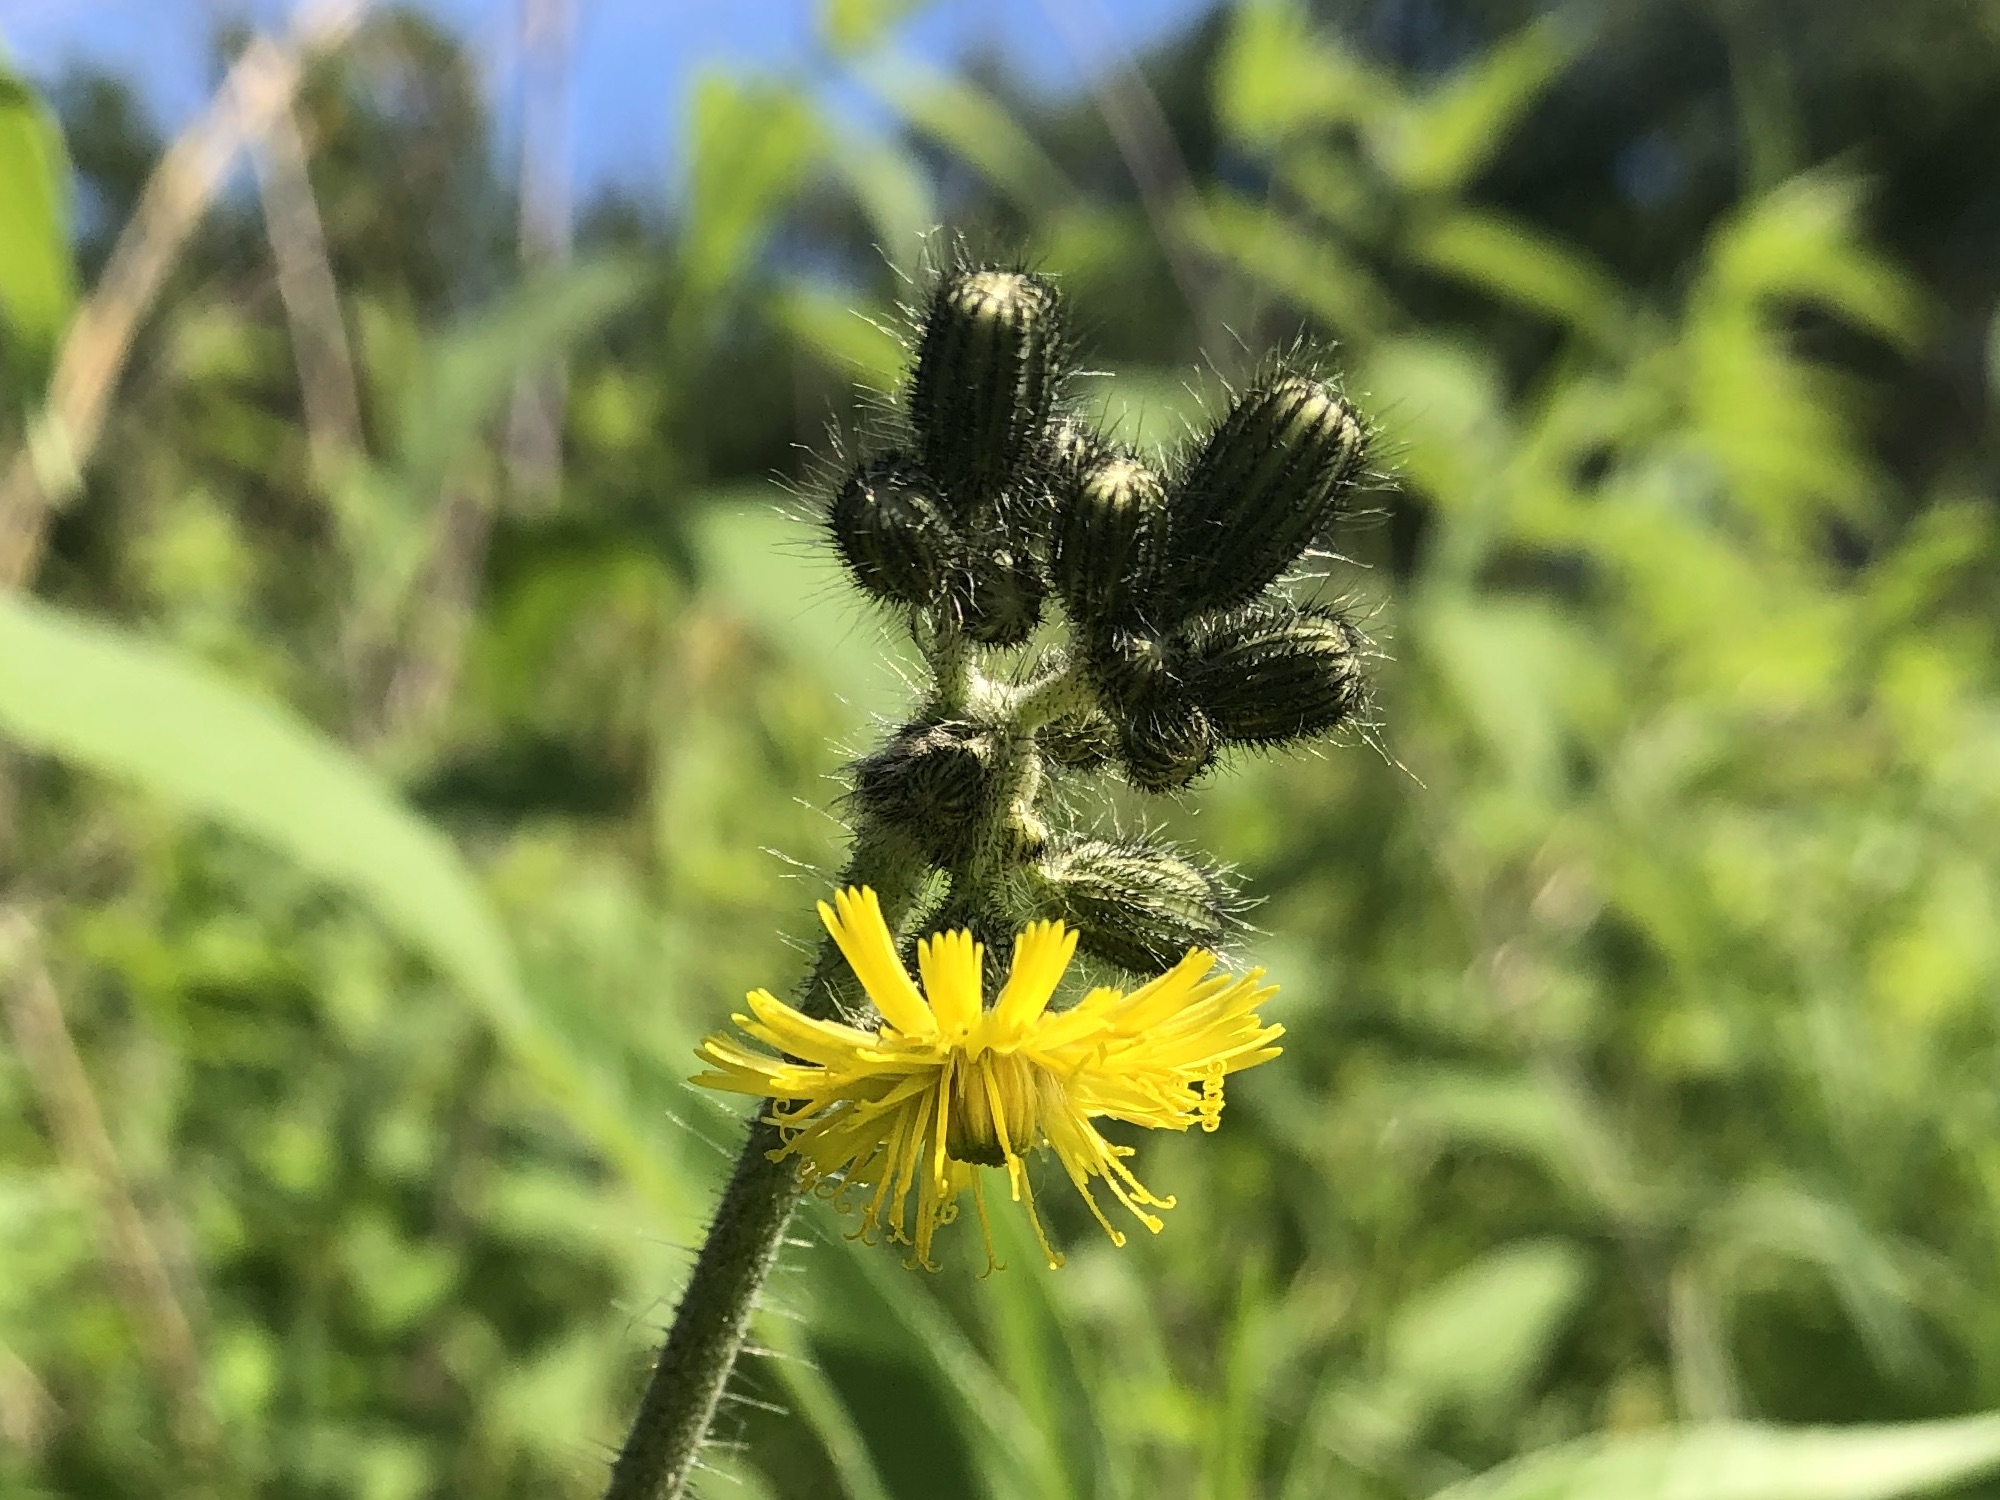 Meadow Hawkweed in the Curtis Prairie in the University of Wisconsin-Madison Arboretum in Madison, Wisconsin on June 9, 2022.